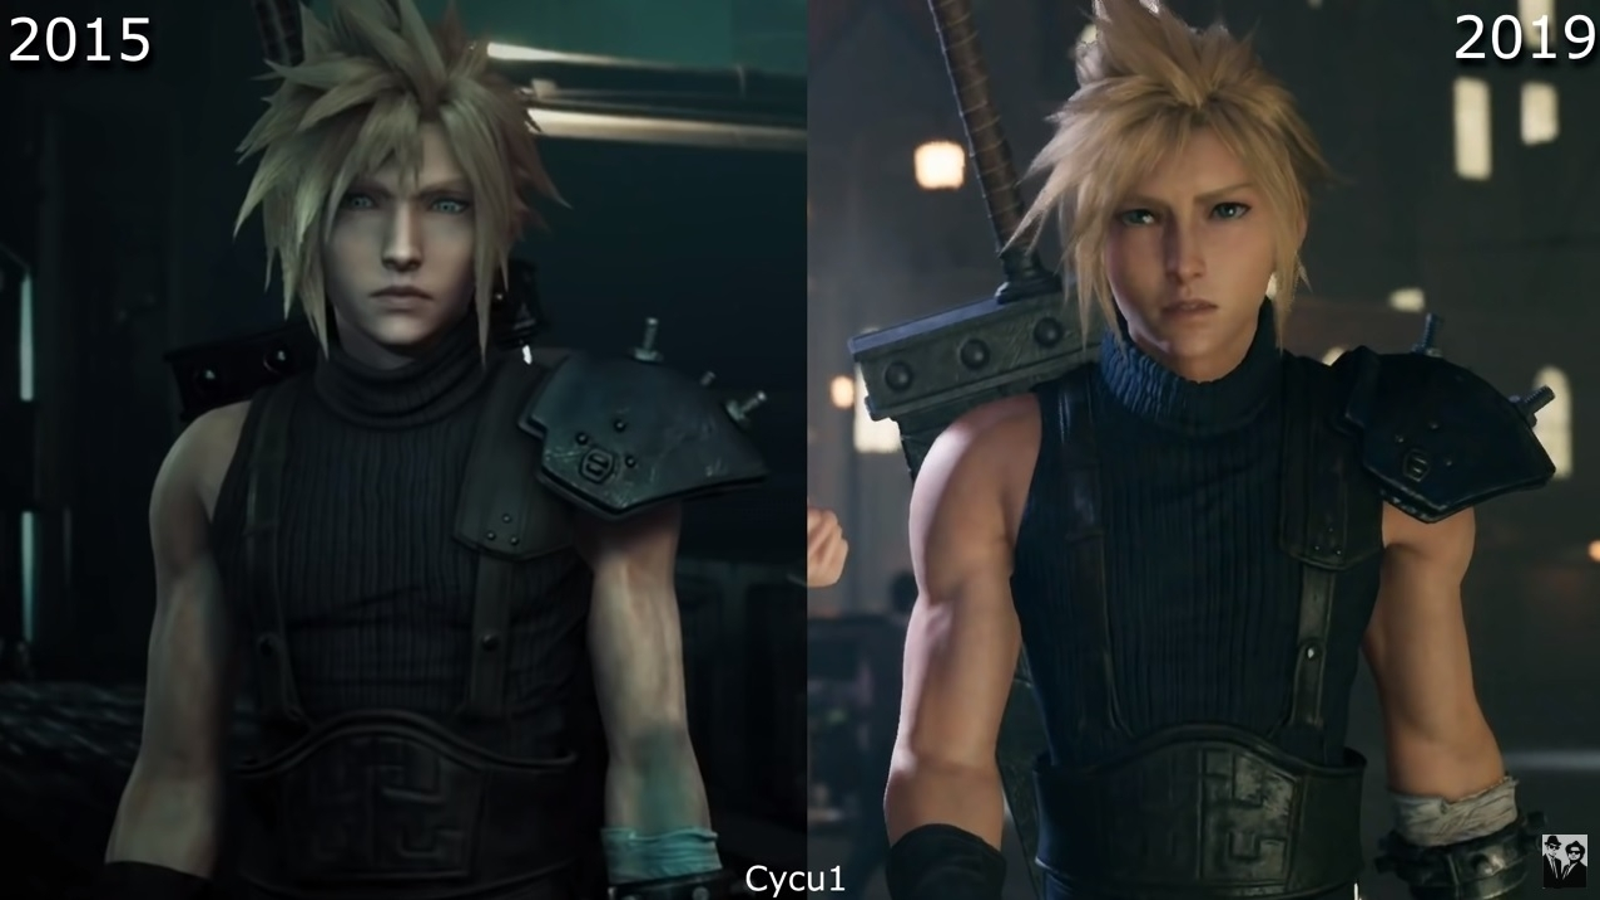 Fantasy 7 Remake has changed a lot over the last three years